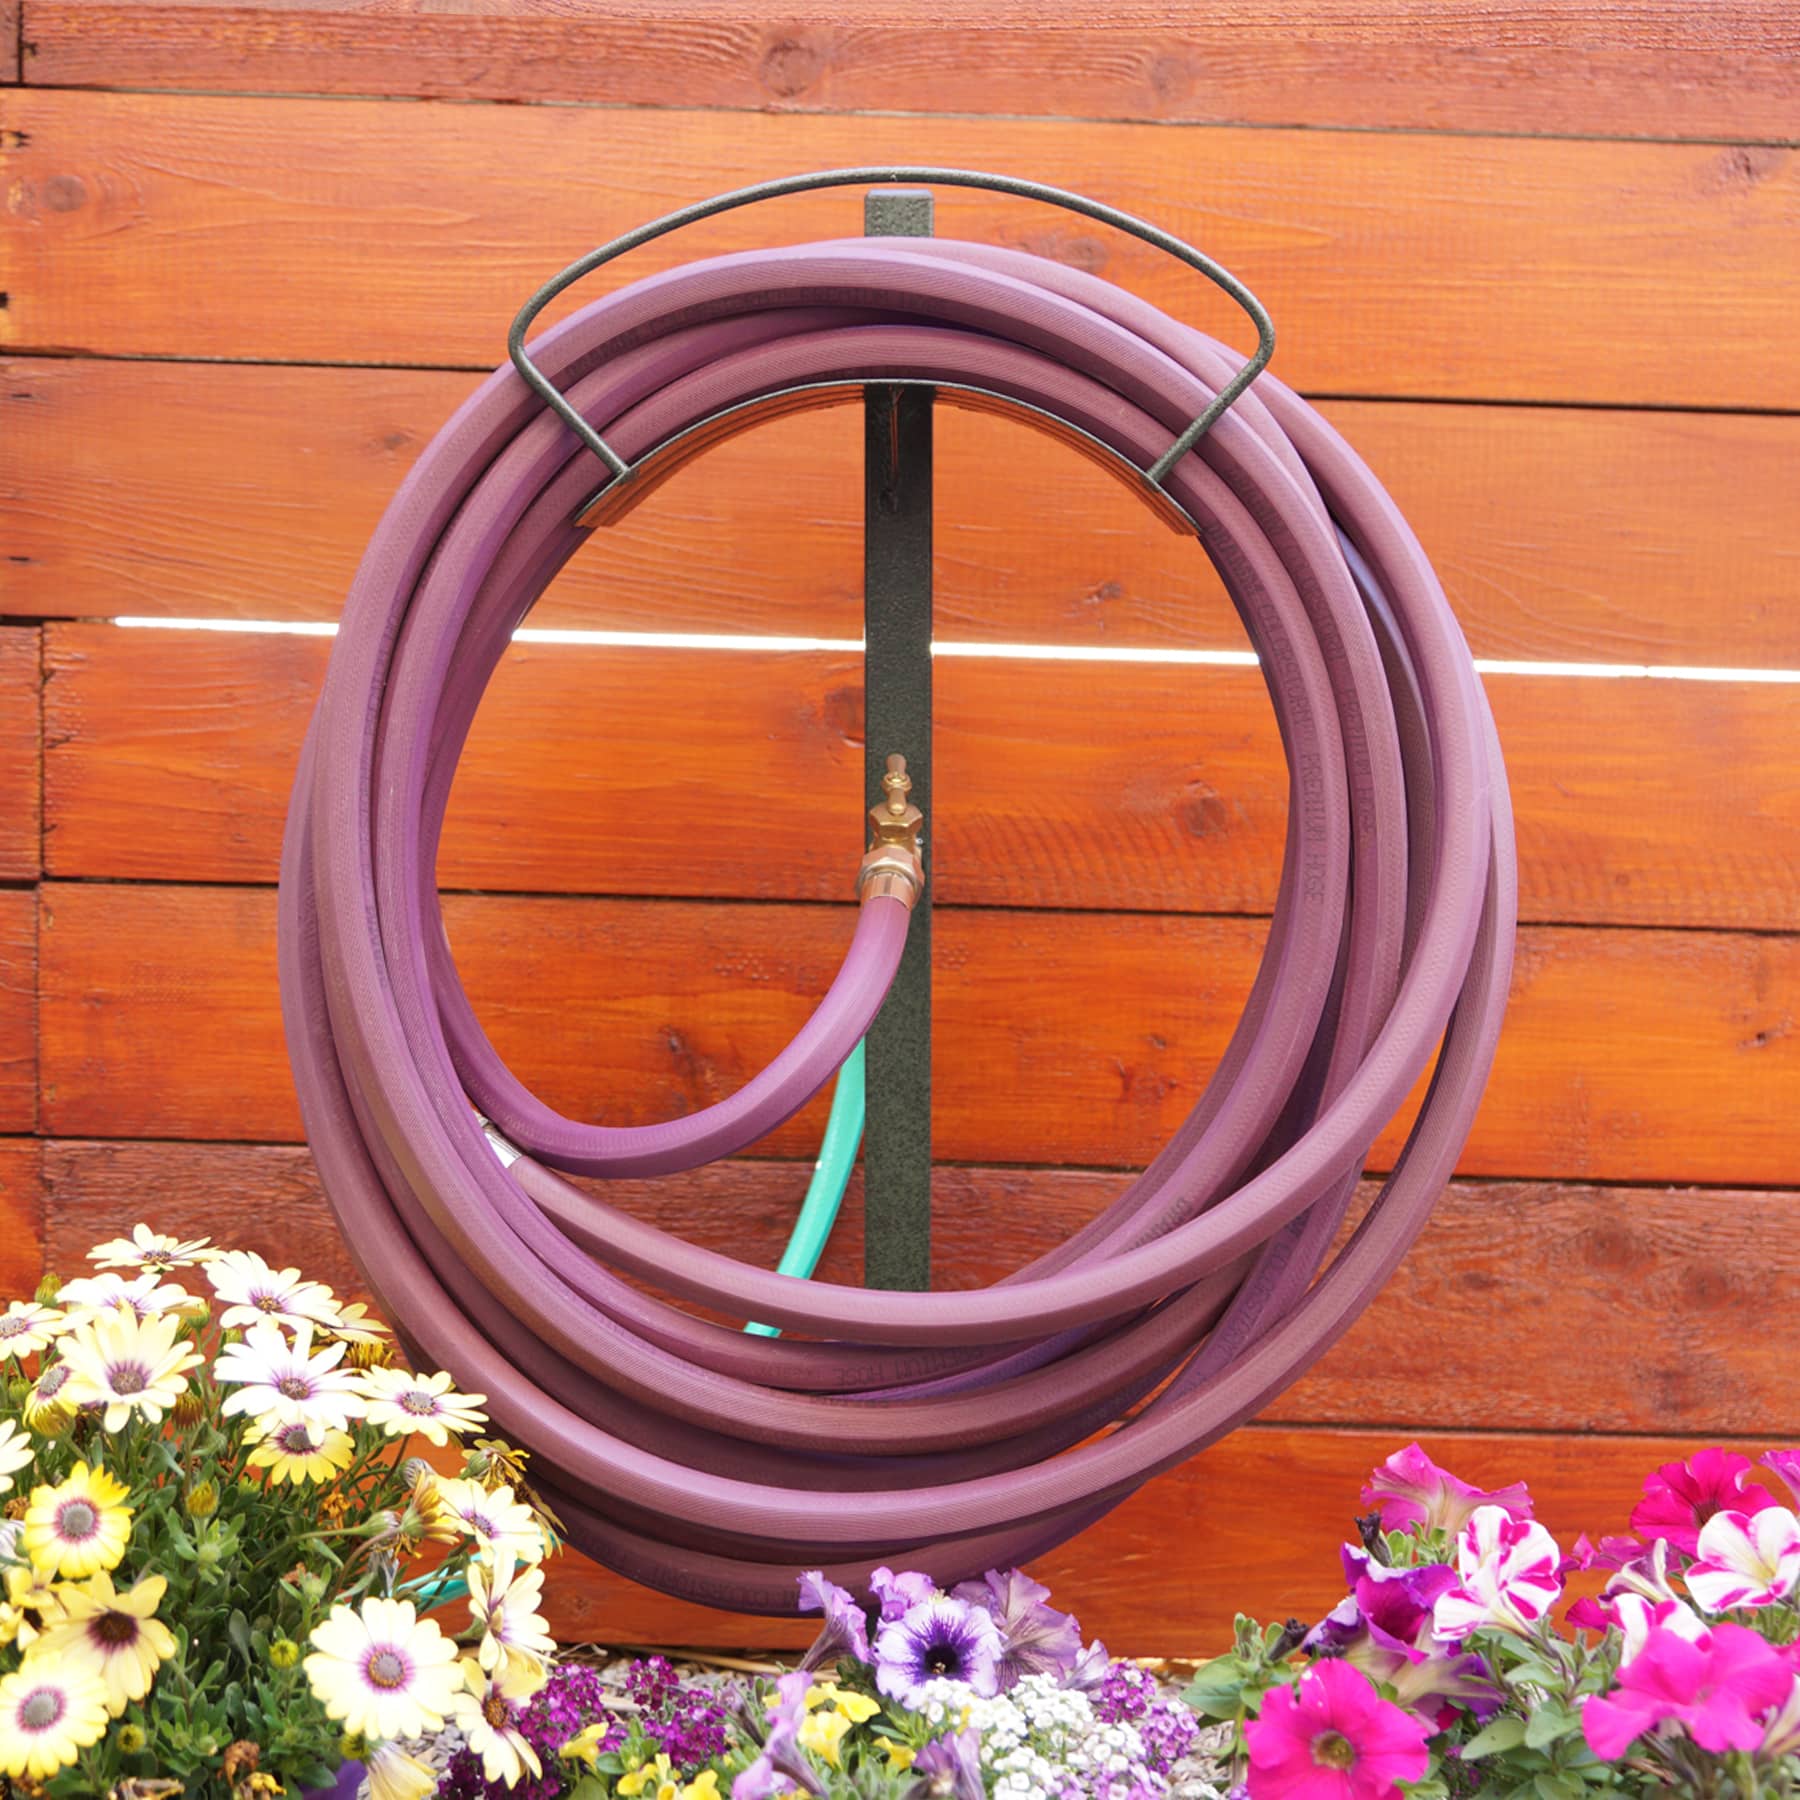 Free-standing Hose Hanger with Faucet